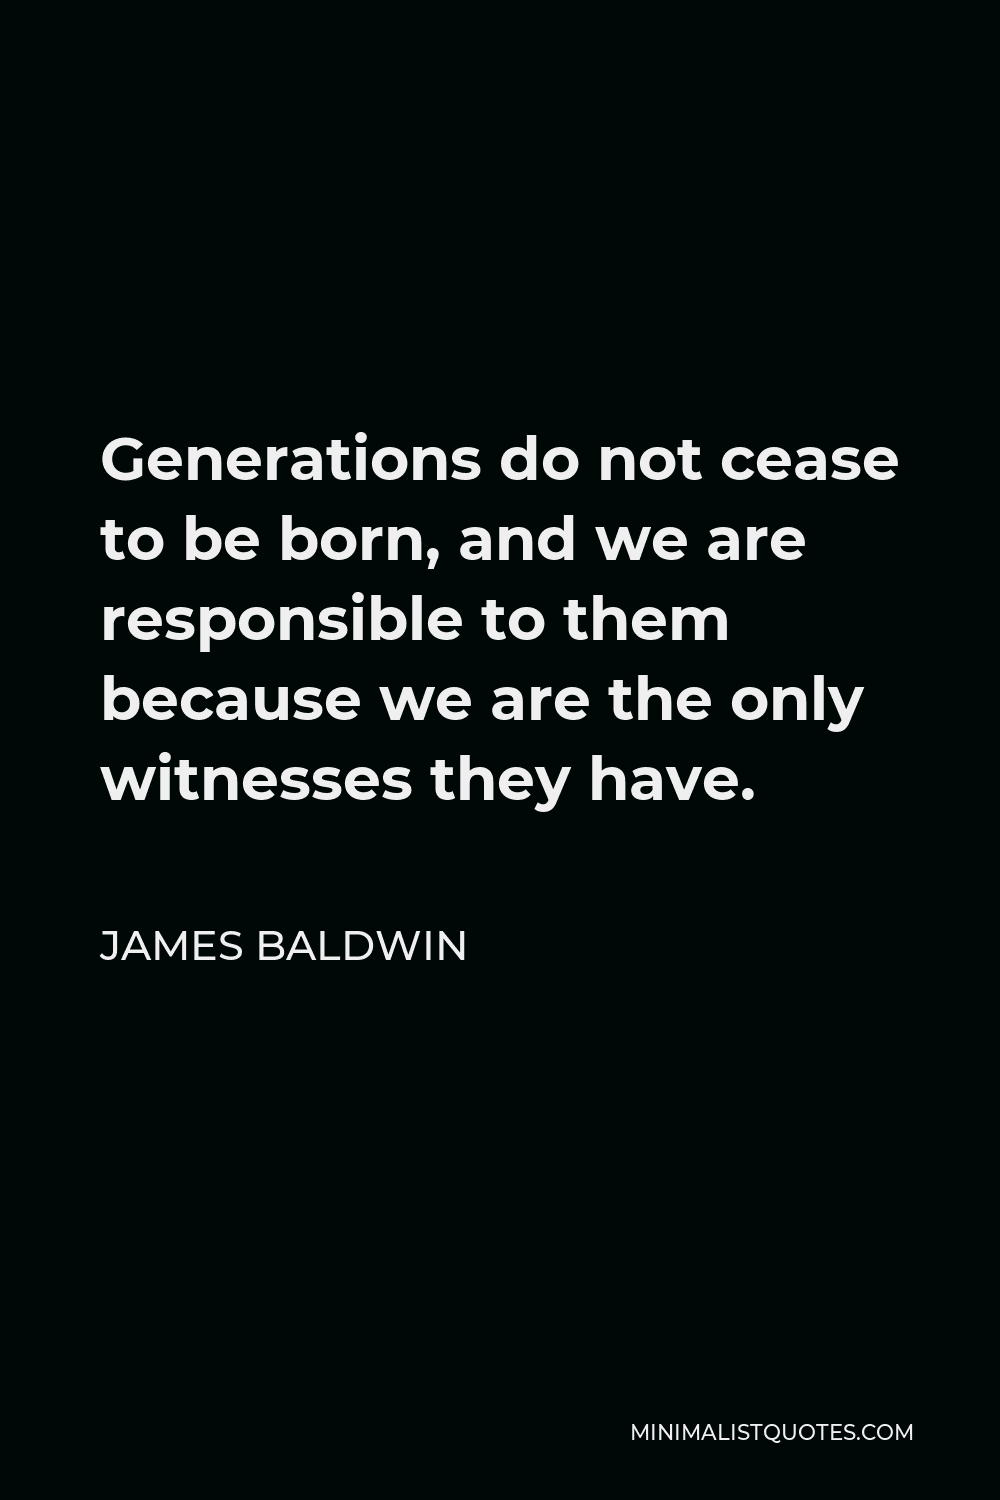 James Baldwin Quote: Generations do not cease to be born, and we are responsible to them because we are the only witnesses they have.